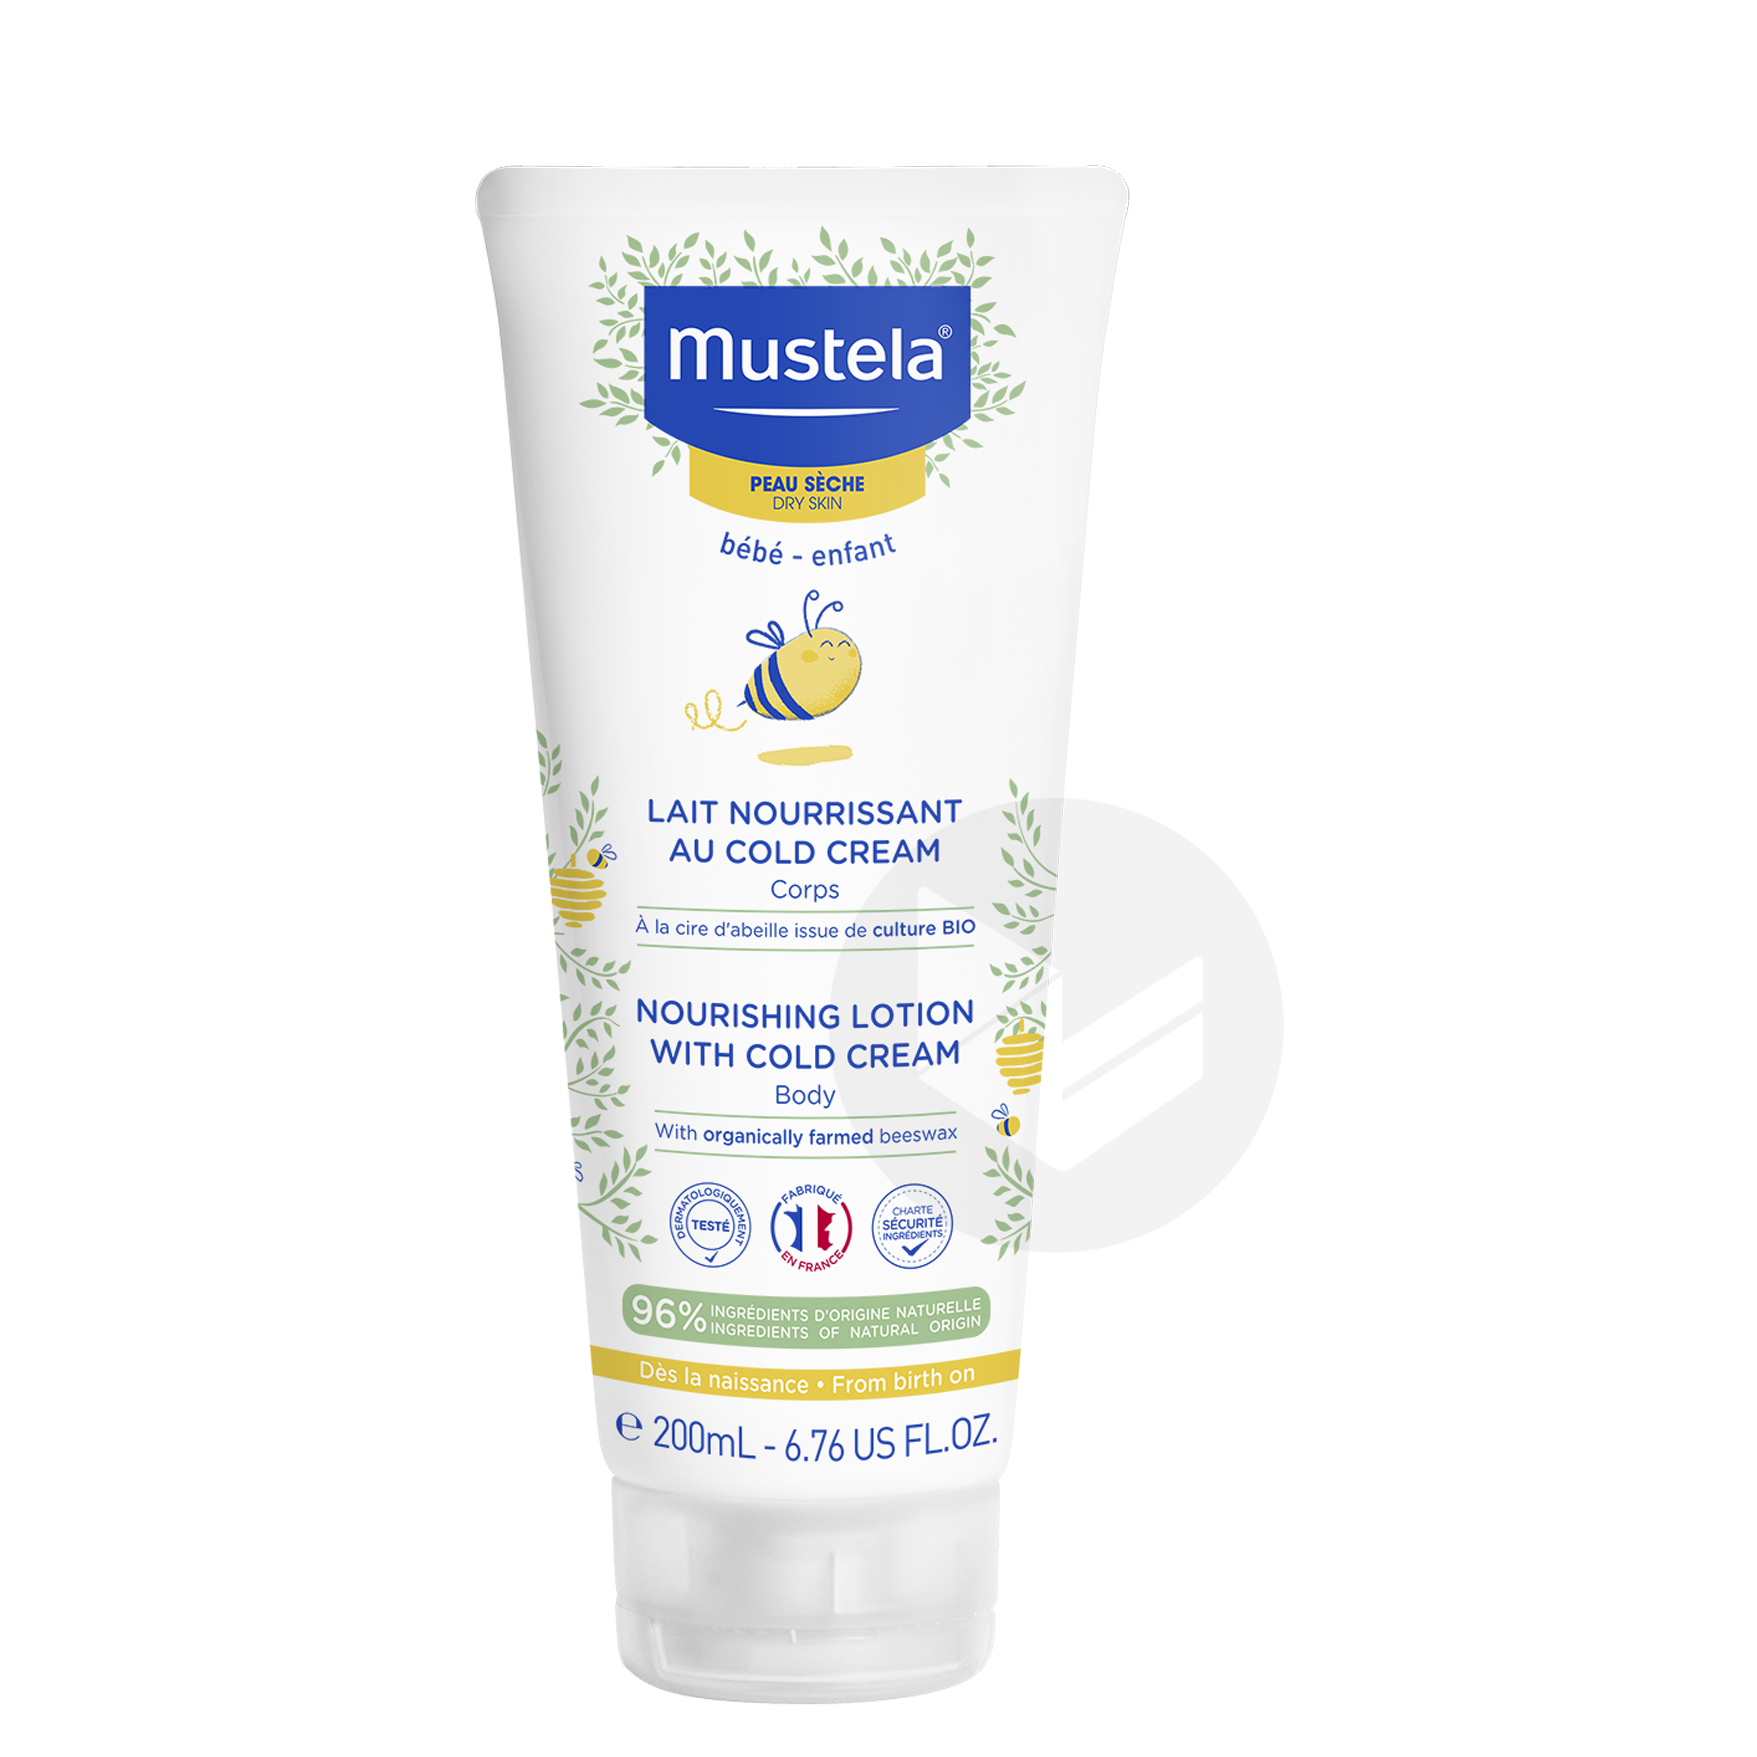 MUSTELA NOURISHING LOTION WITH COLD CREAM.